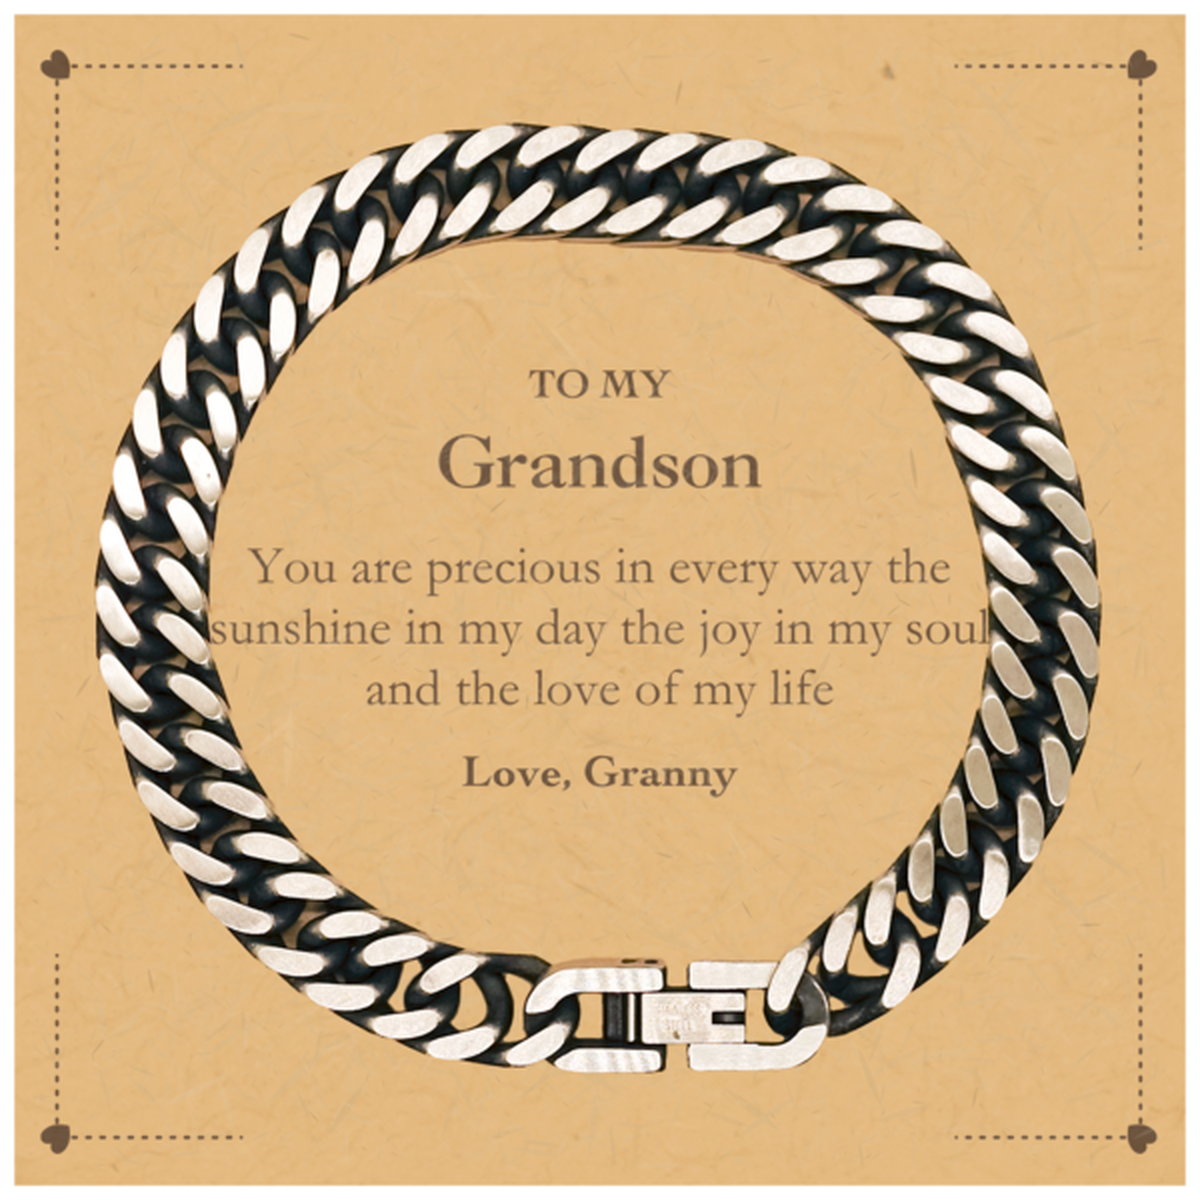 Graduation Gifts for Grandson Cuban Link Chain Bracelet Present from Granny, Christmas Grandson Birthday Gifts Grandson You are precious in every way the sunshine in my day. Love, Granny